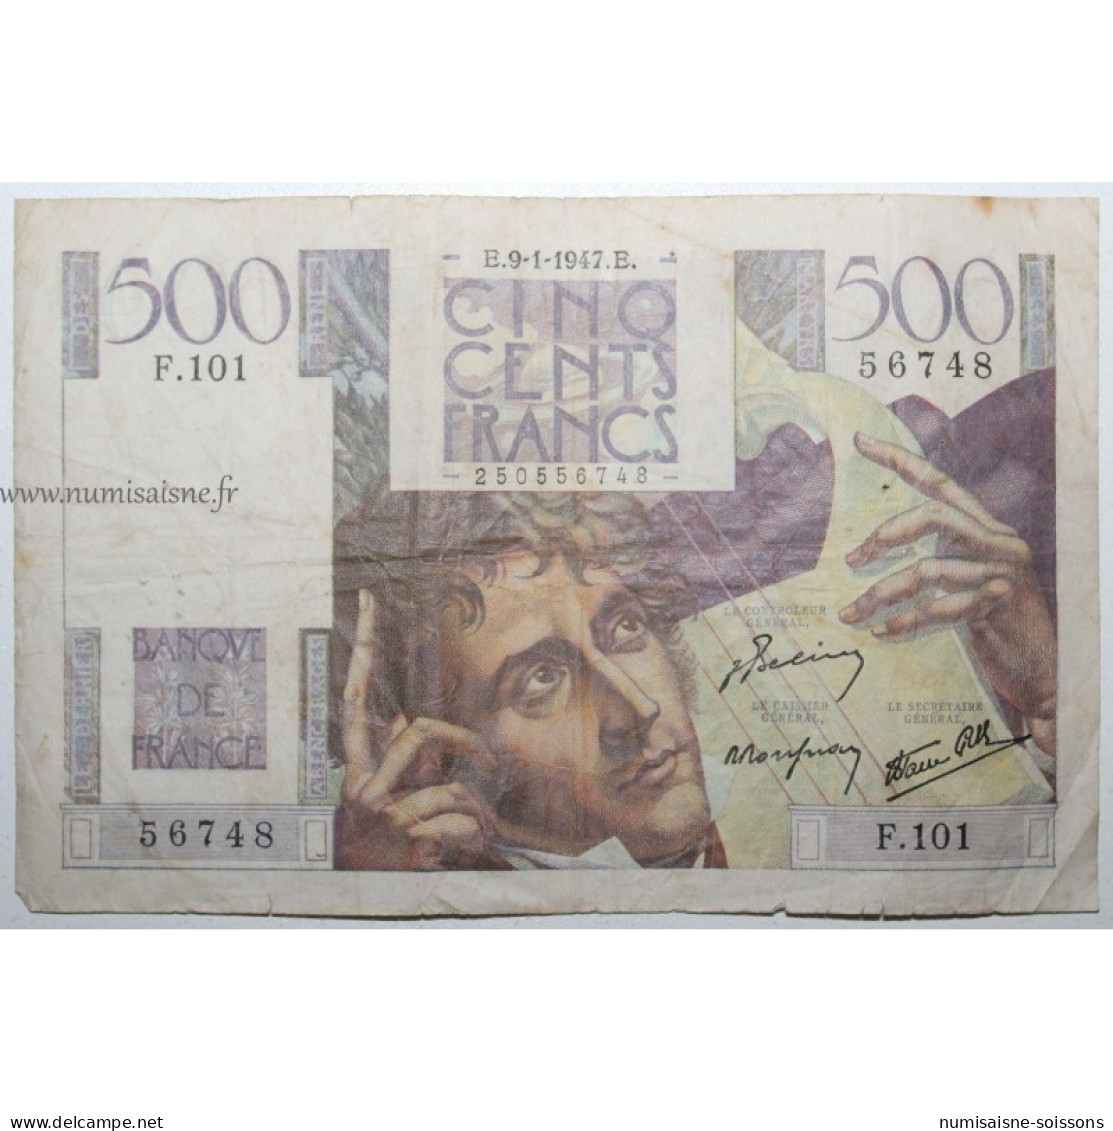 FAY 34/07 - 500 FRANCS CHATEAUBRIAND - 09.01.1947 - PICK 129 - B/TB - 500 F 1945-1953 ''Chateaubriand''